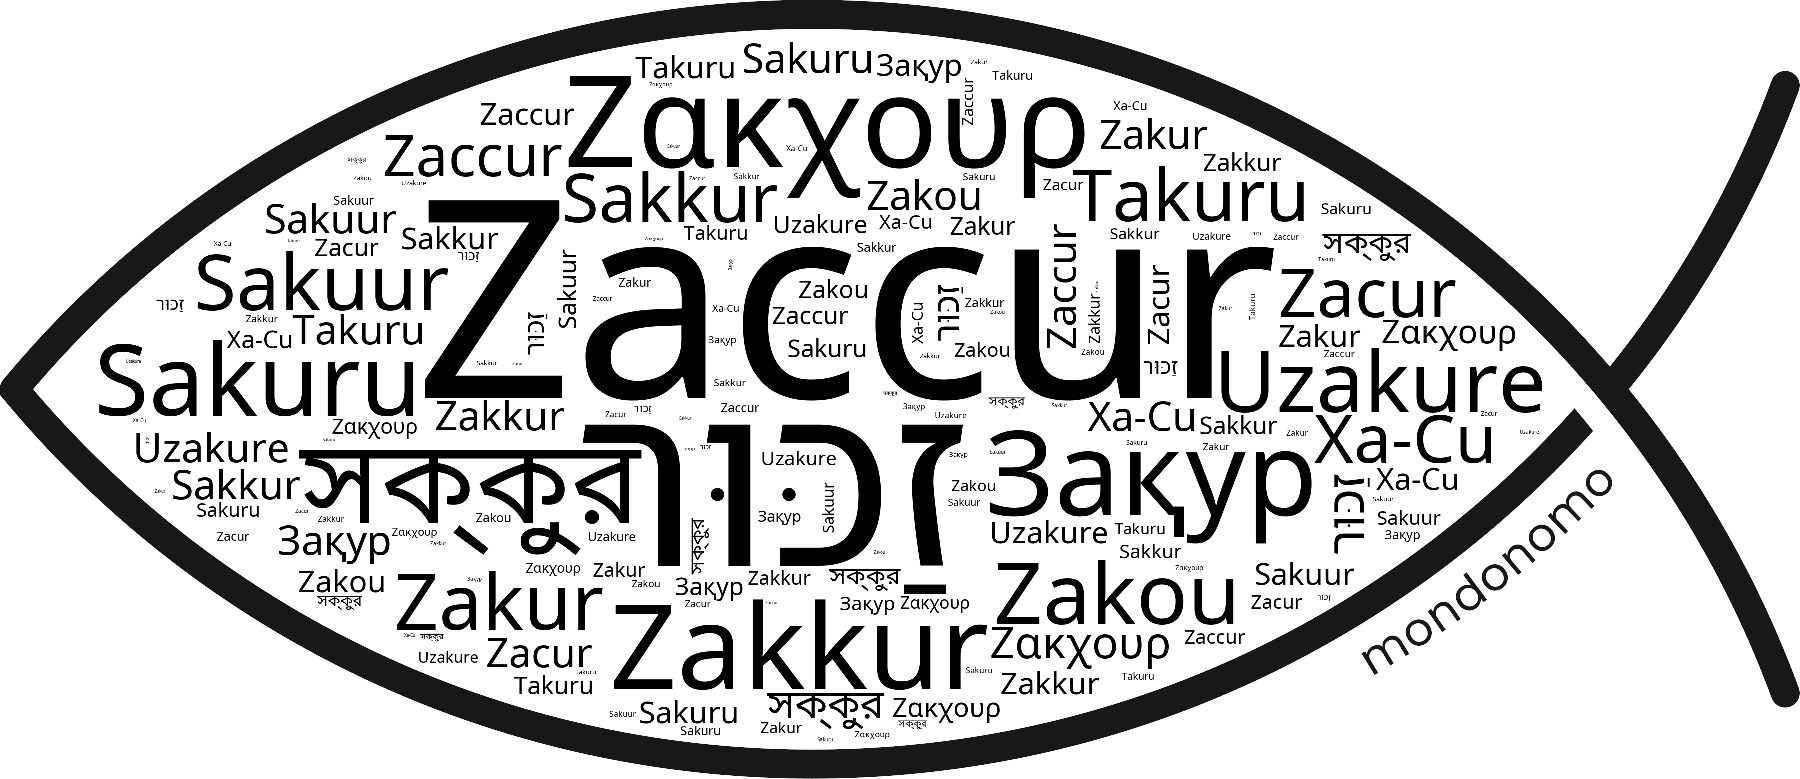 Name Zaccur in the world's Bibles